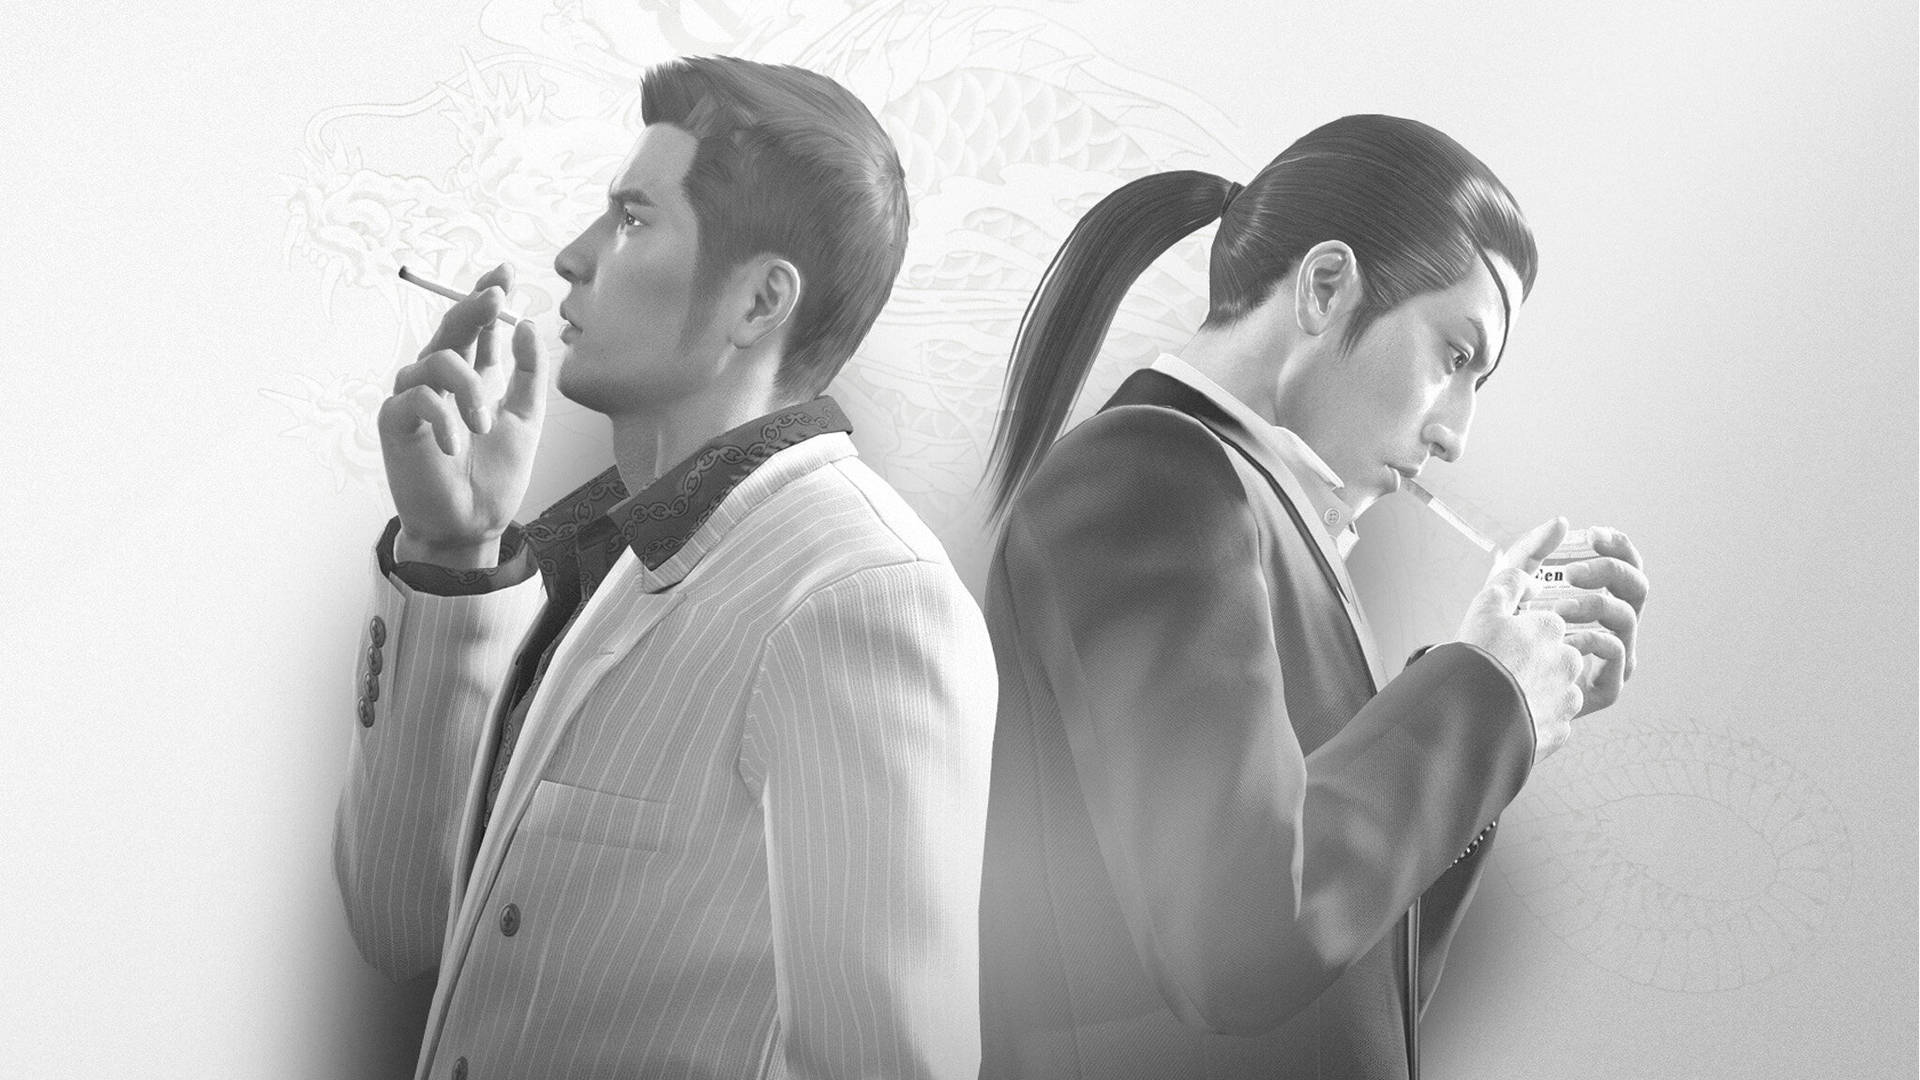 Majima Goro looking intense and ready to take on whatever comes his way. Wallpaper